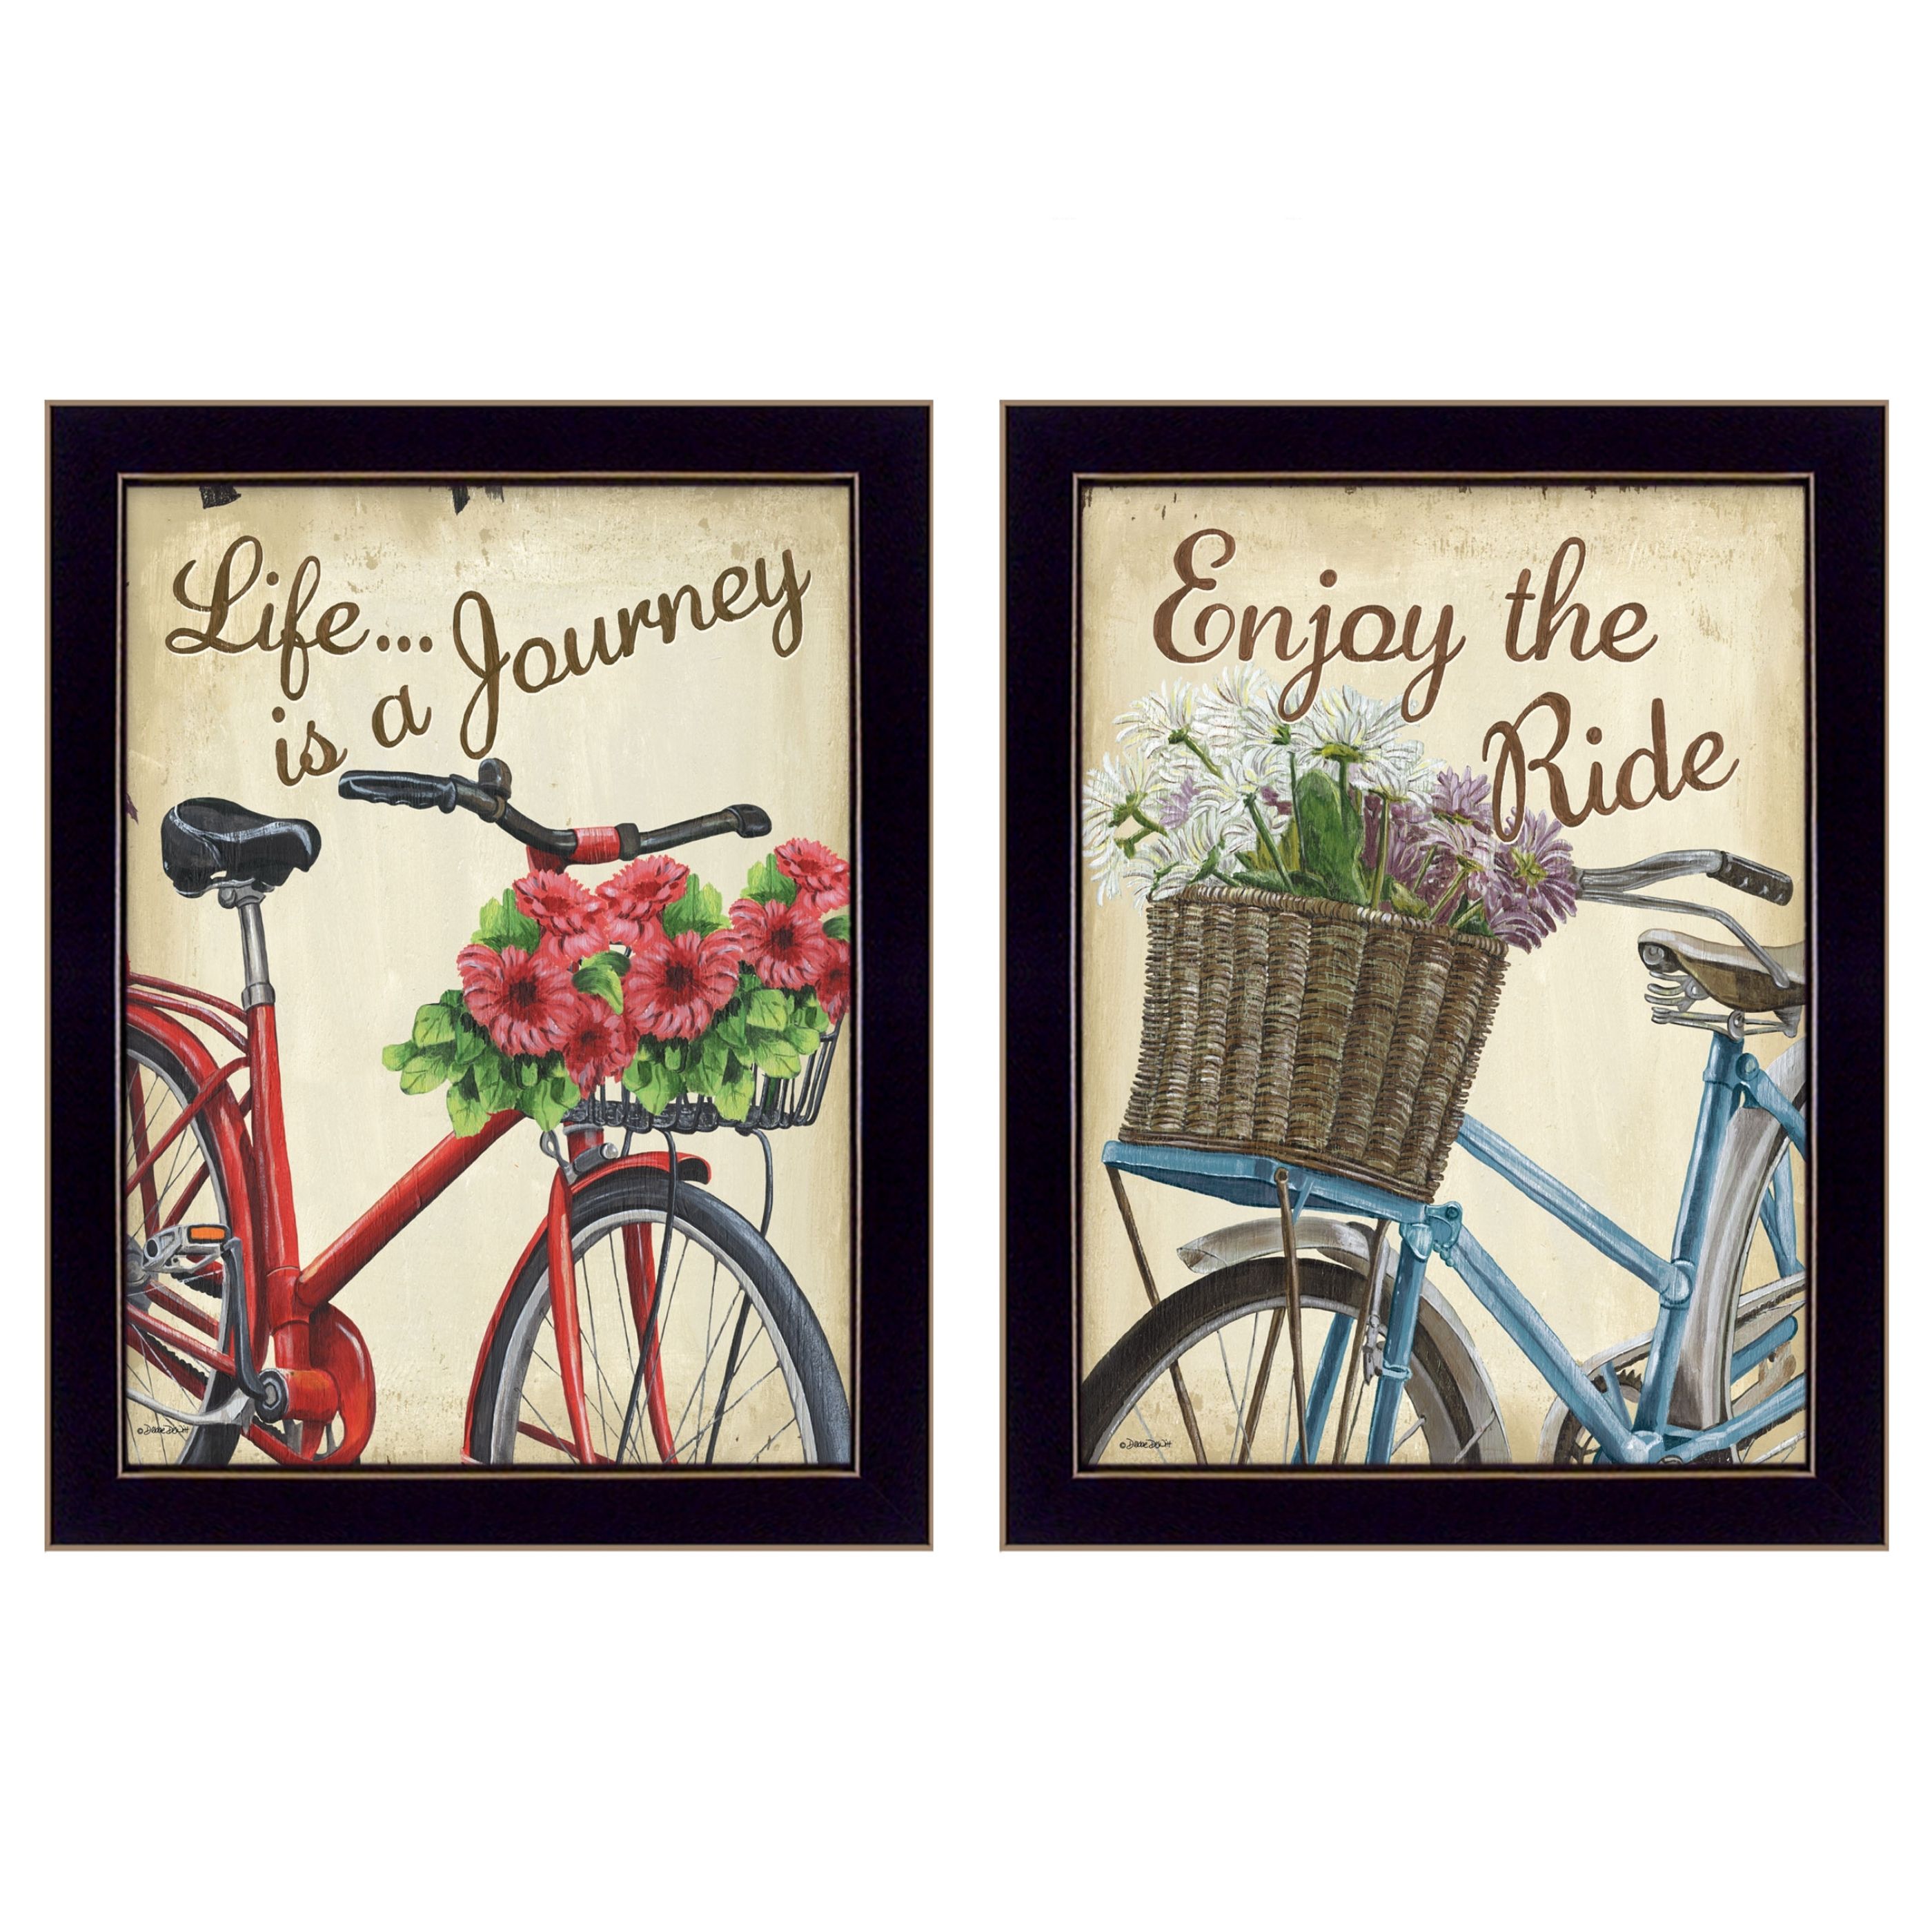 "Vintage Bicycles Collection" 2-Piece Vignette By Debbie DeWitt, Printed Wall Art, Ready To Hang Framed Poster, Black Frame